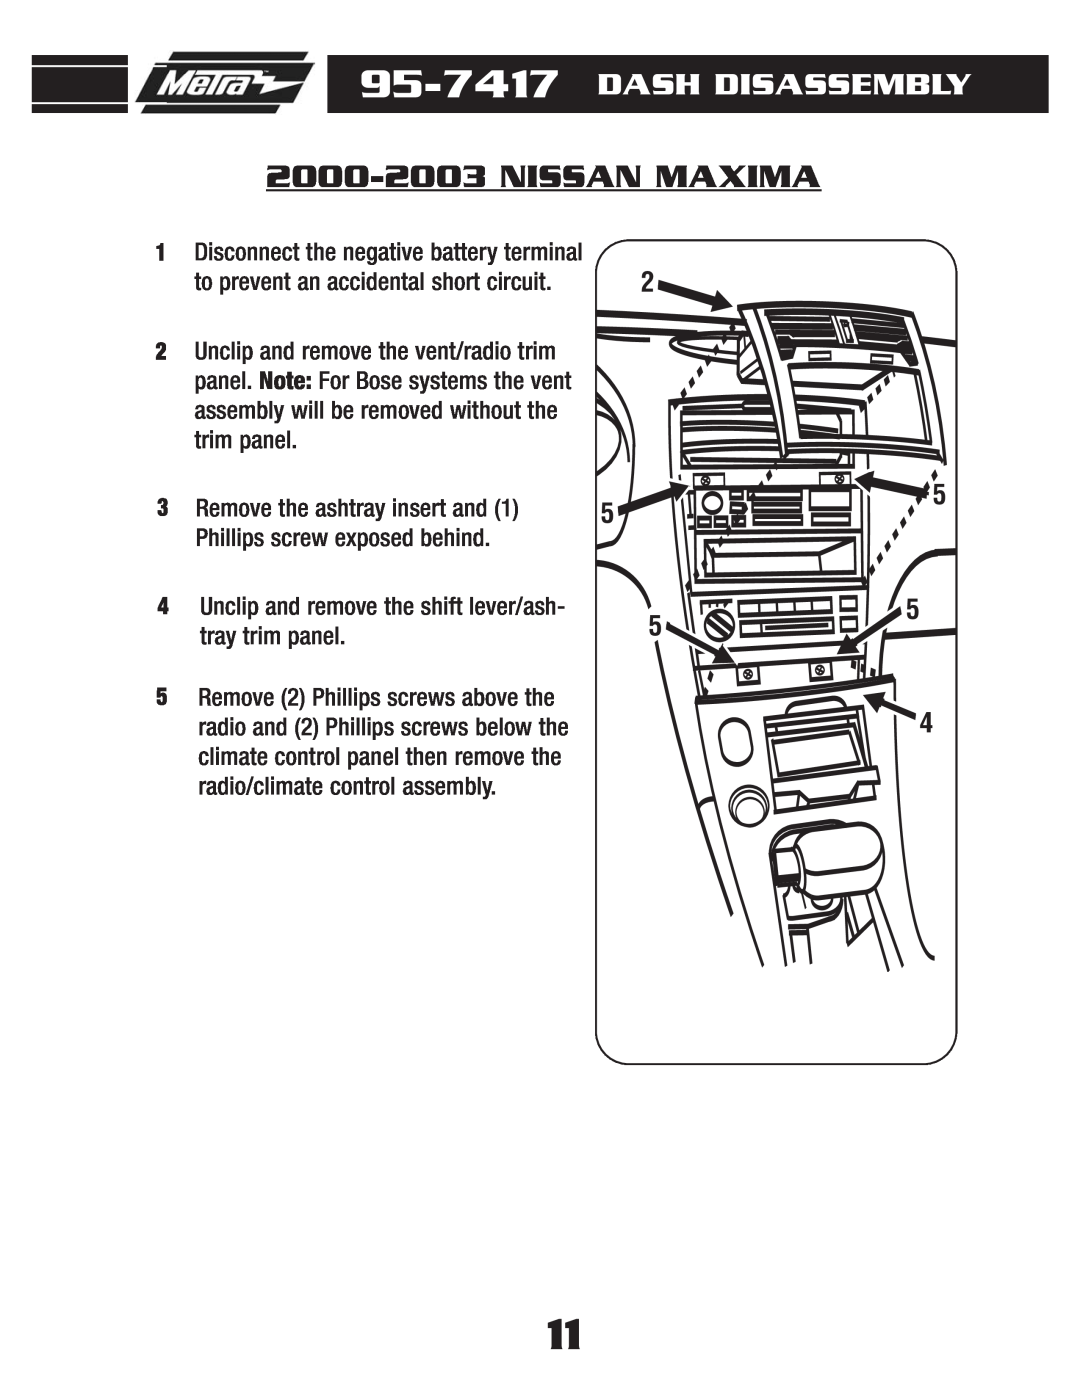 Metra Electronics 95-7417 2000-2003NISSAN MAXIMA, 1Disconnect the negative battery terminal, Remove the ashtray insert and 